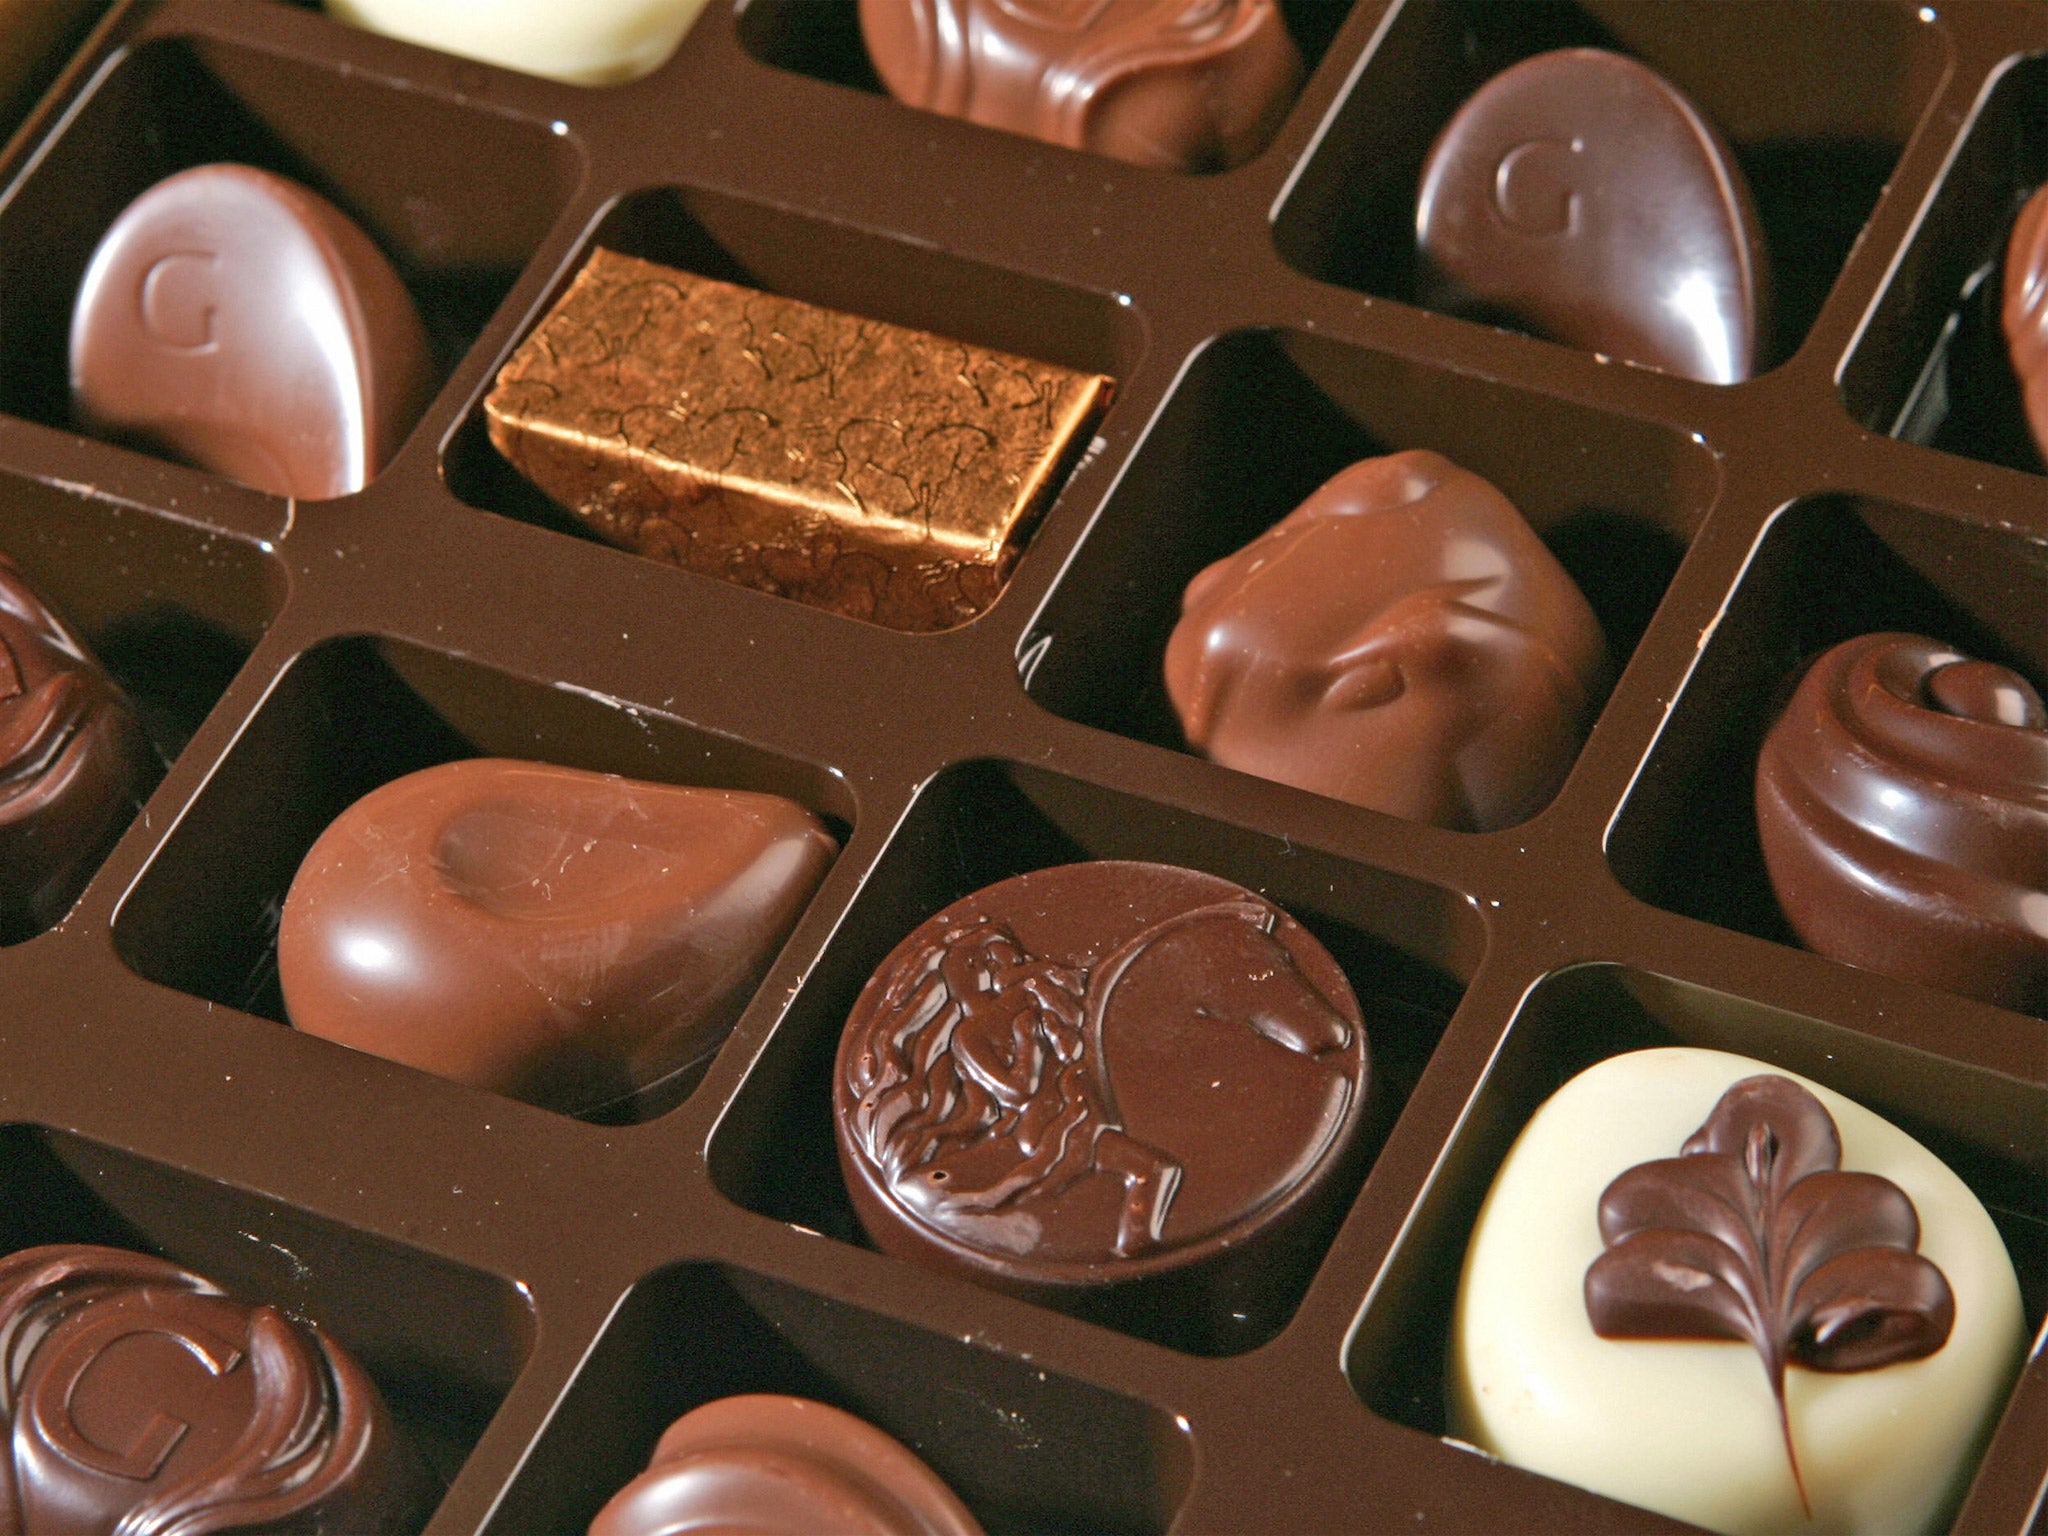 Chinese authorities said they destroyed Belgian chocolates because they contained toxic substances